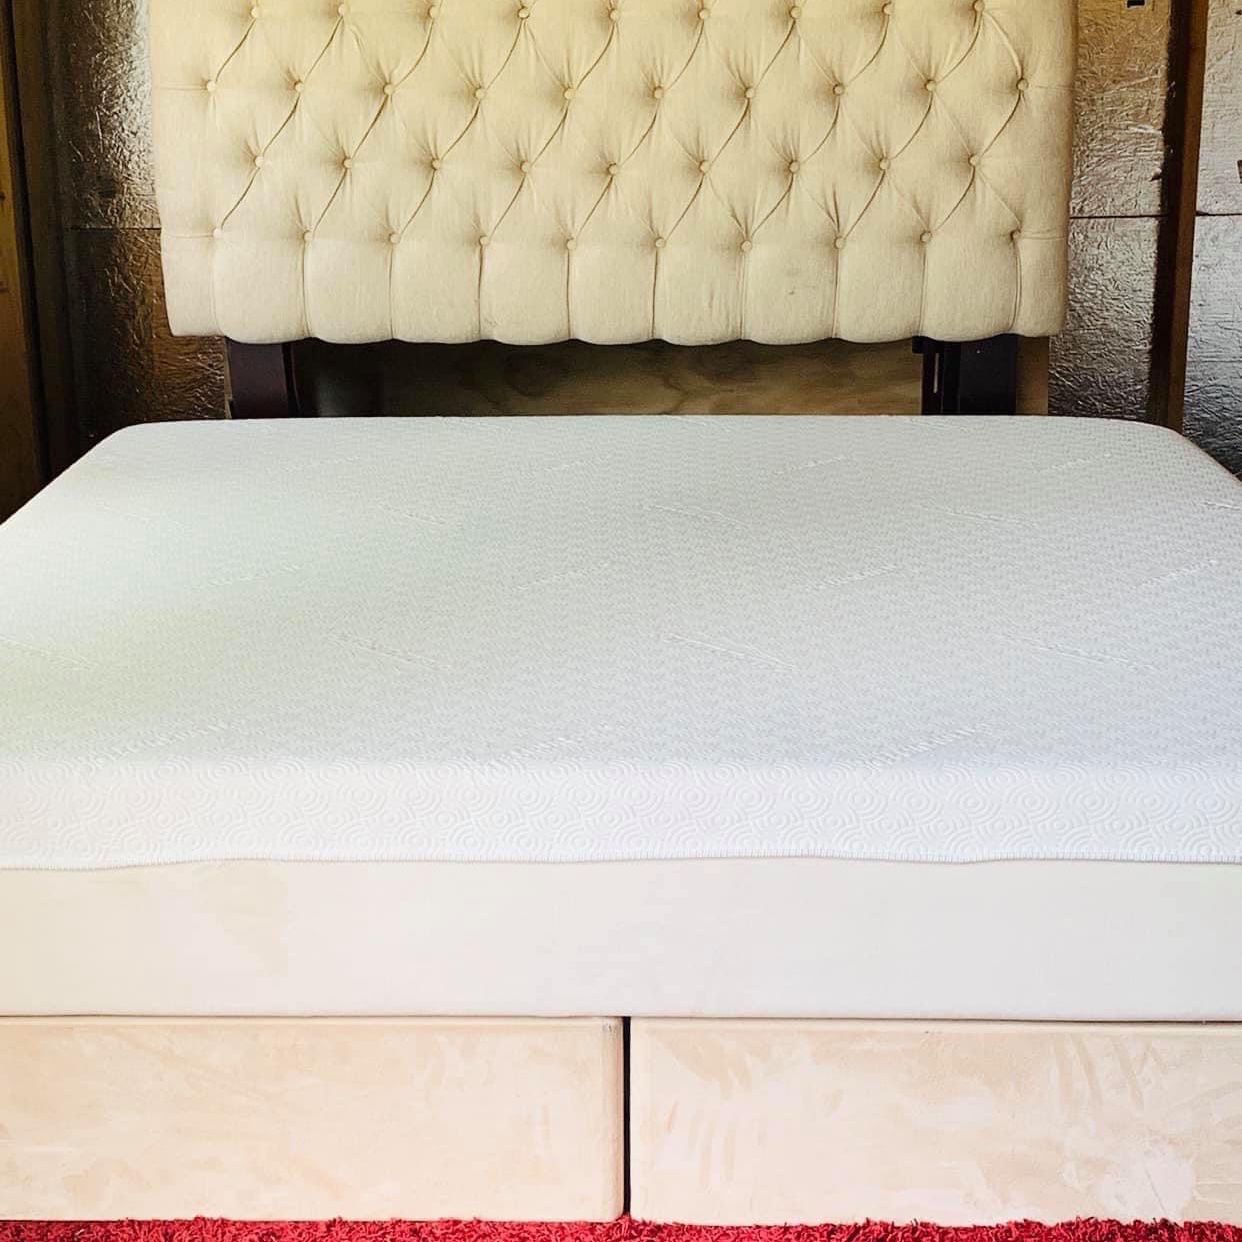 USED KING SIZE TEMPER PEDIC MEMORY FOAM COOL GEL MATTRESS WITH BOX SPRING DELIVERY 🚚 AVAILABLE 